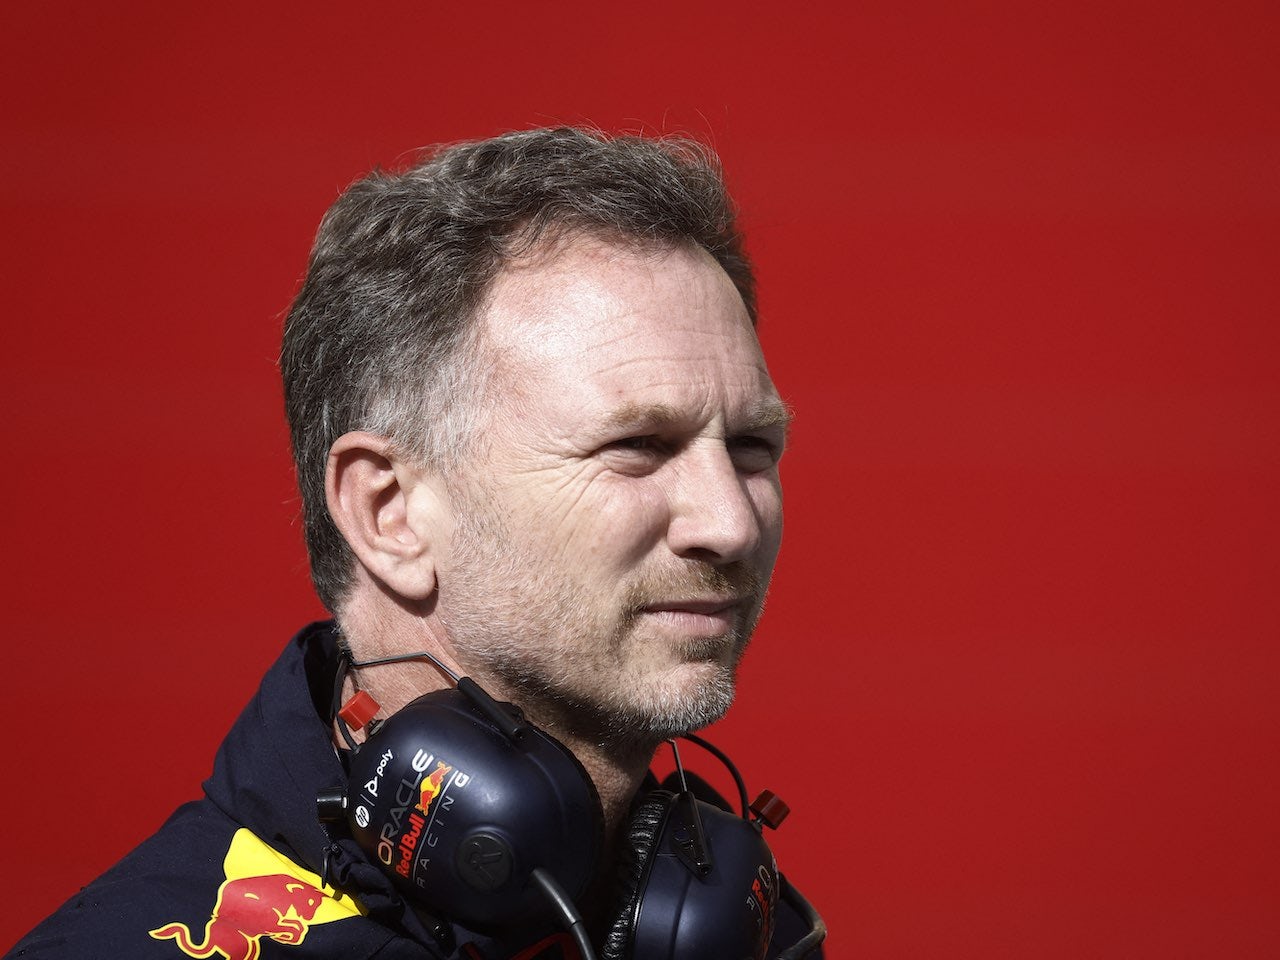 Marko says 'Mr Horner' has no power to oust him